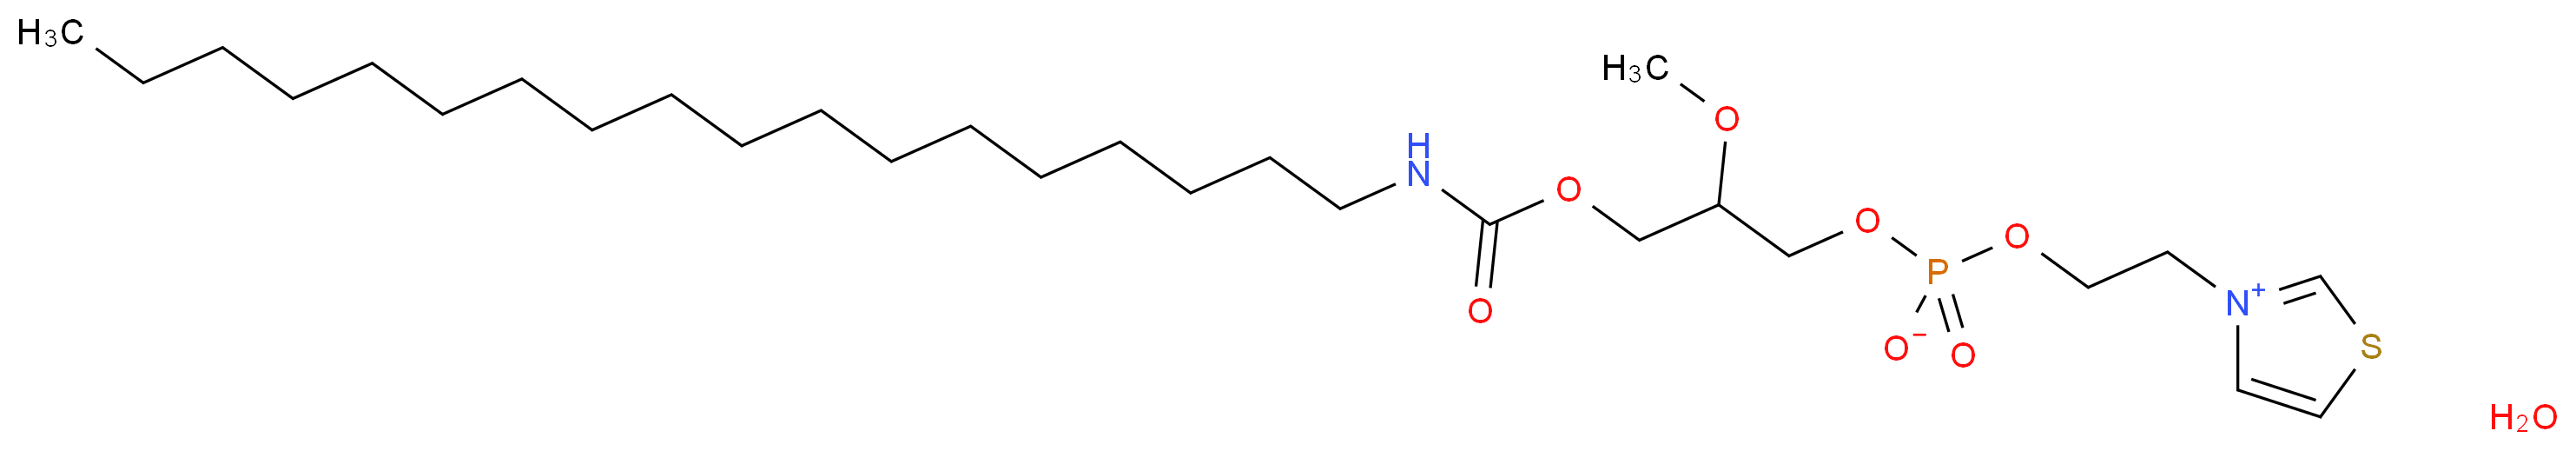 85703-73-7(anhydrous) molecular structure